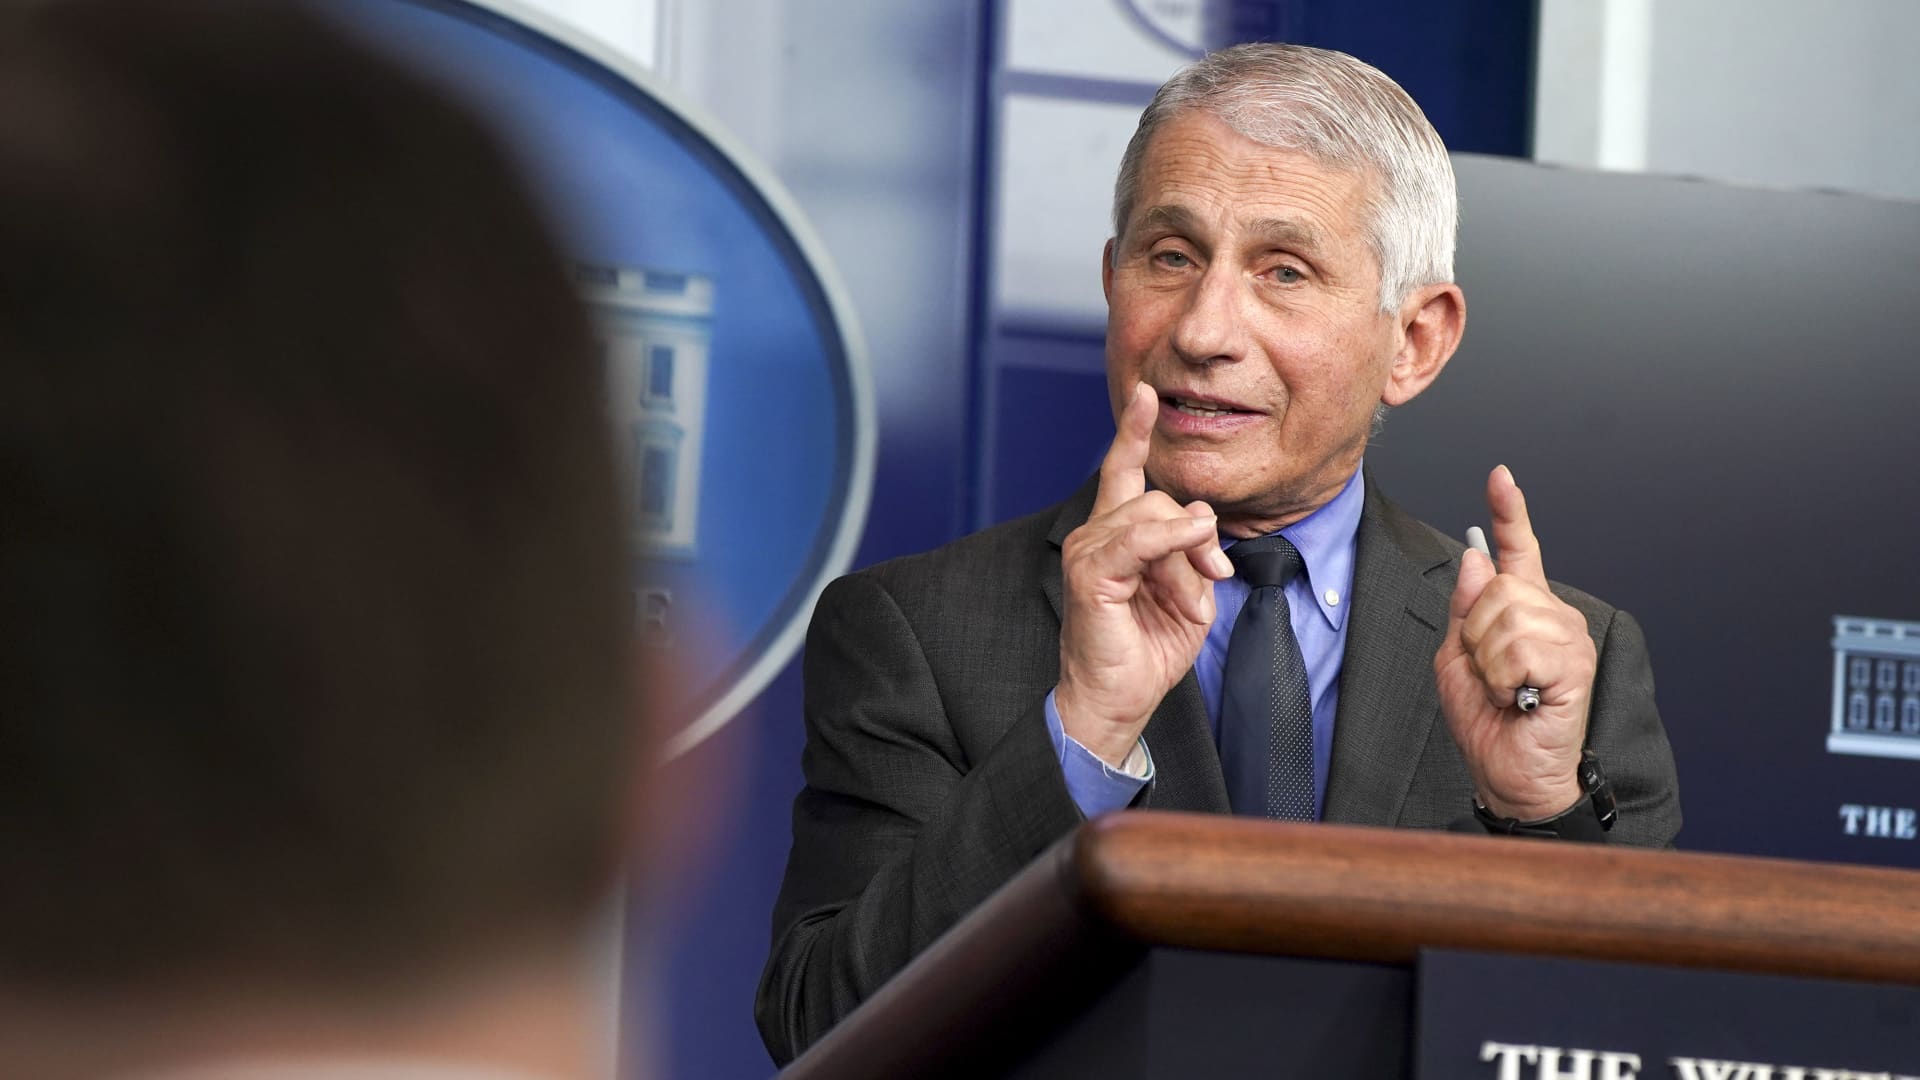 Anthony Fauci, director of the National Institute of Allergy and Infectious Diseases, speaks during a news conference in the James S. Brady Press Briefing Room at the White House in Washington, D.C., U.S., on Tuesday, April 13, 2021.